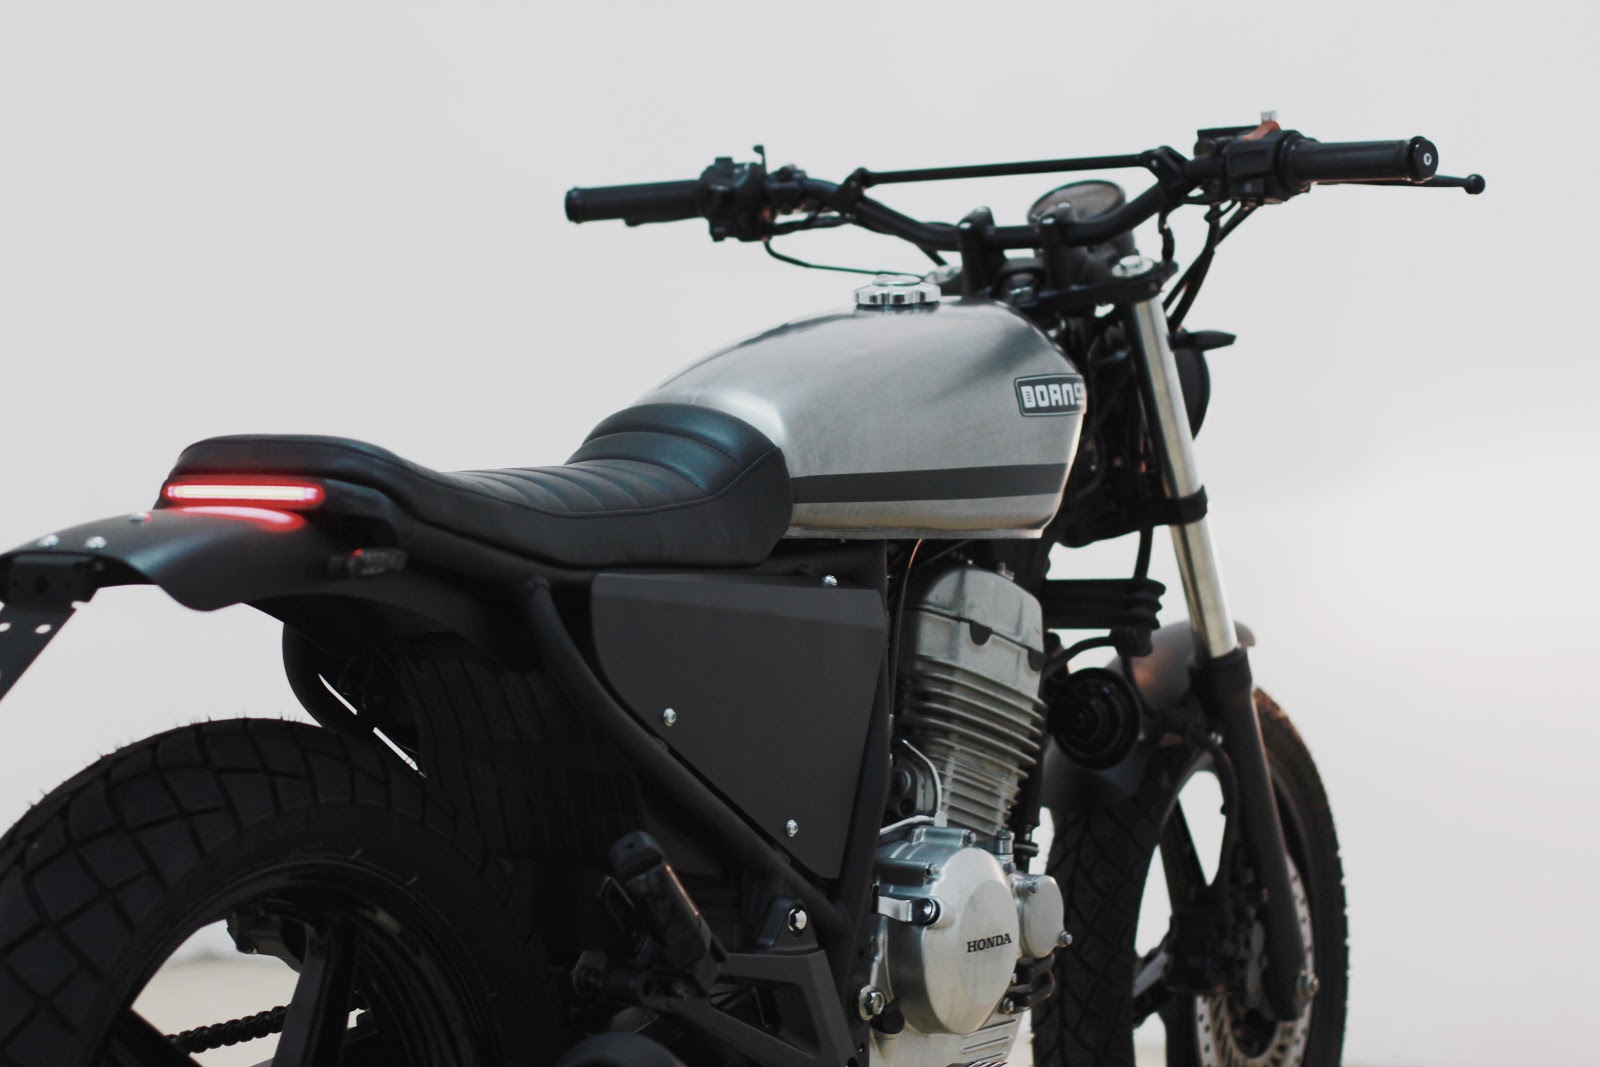 BORN Motor: 3D printed motorcycle parts for time and cost savings